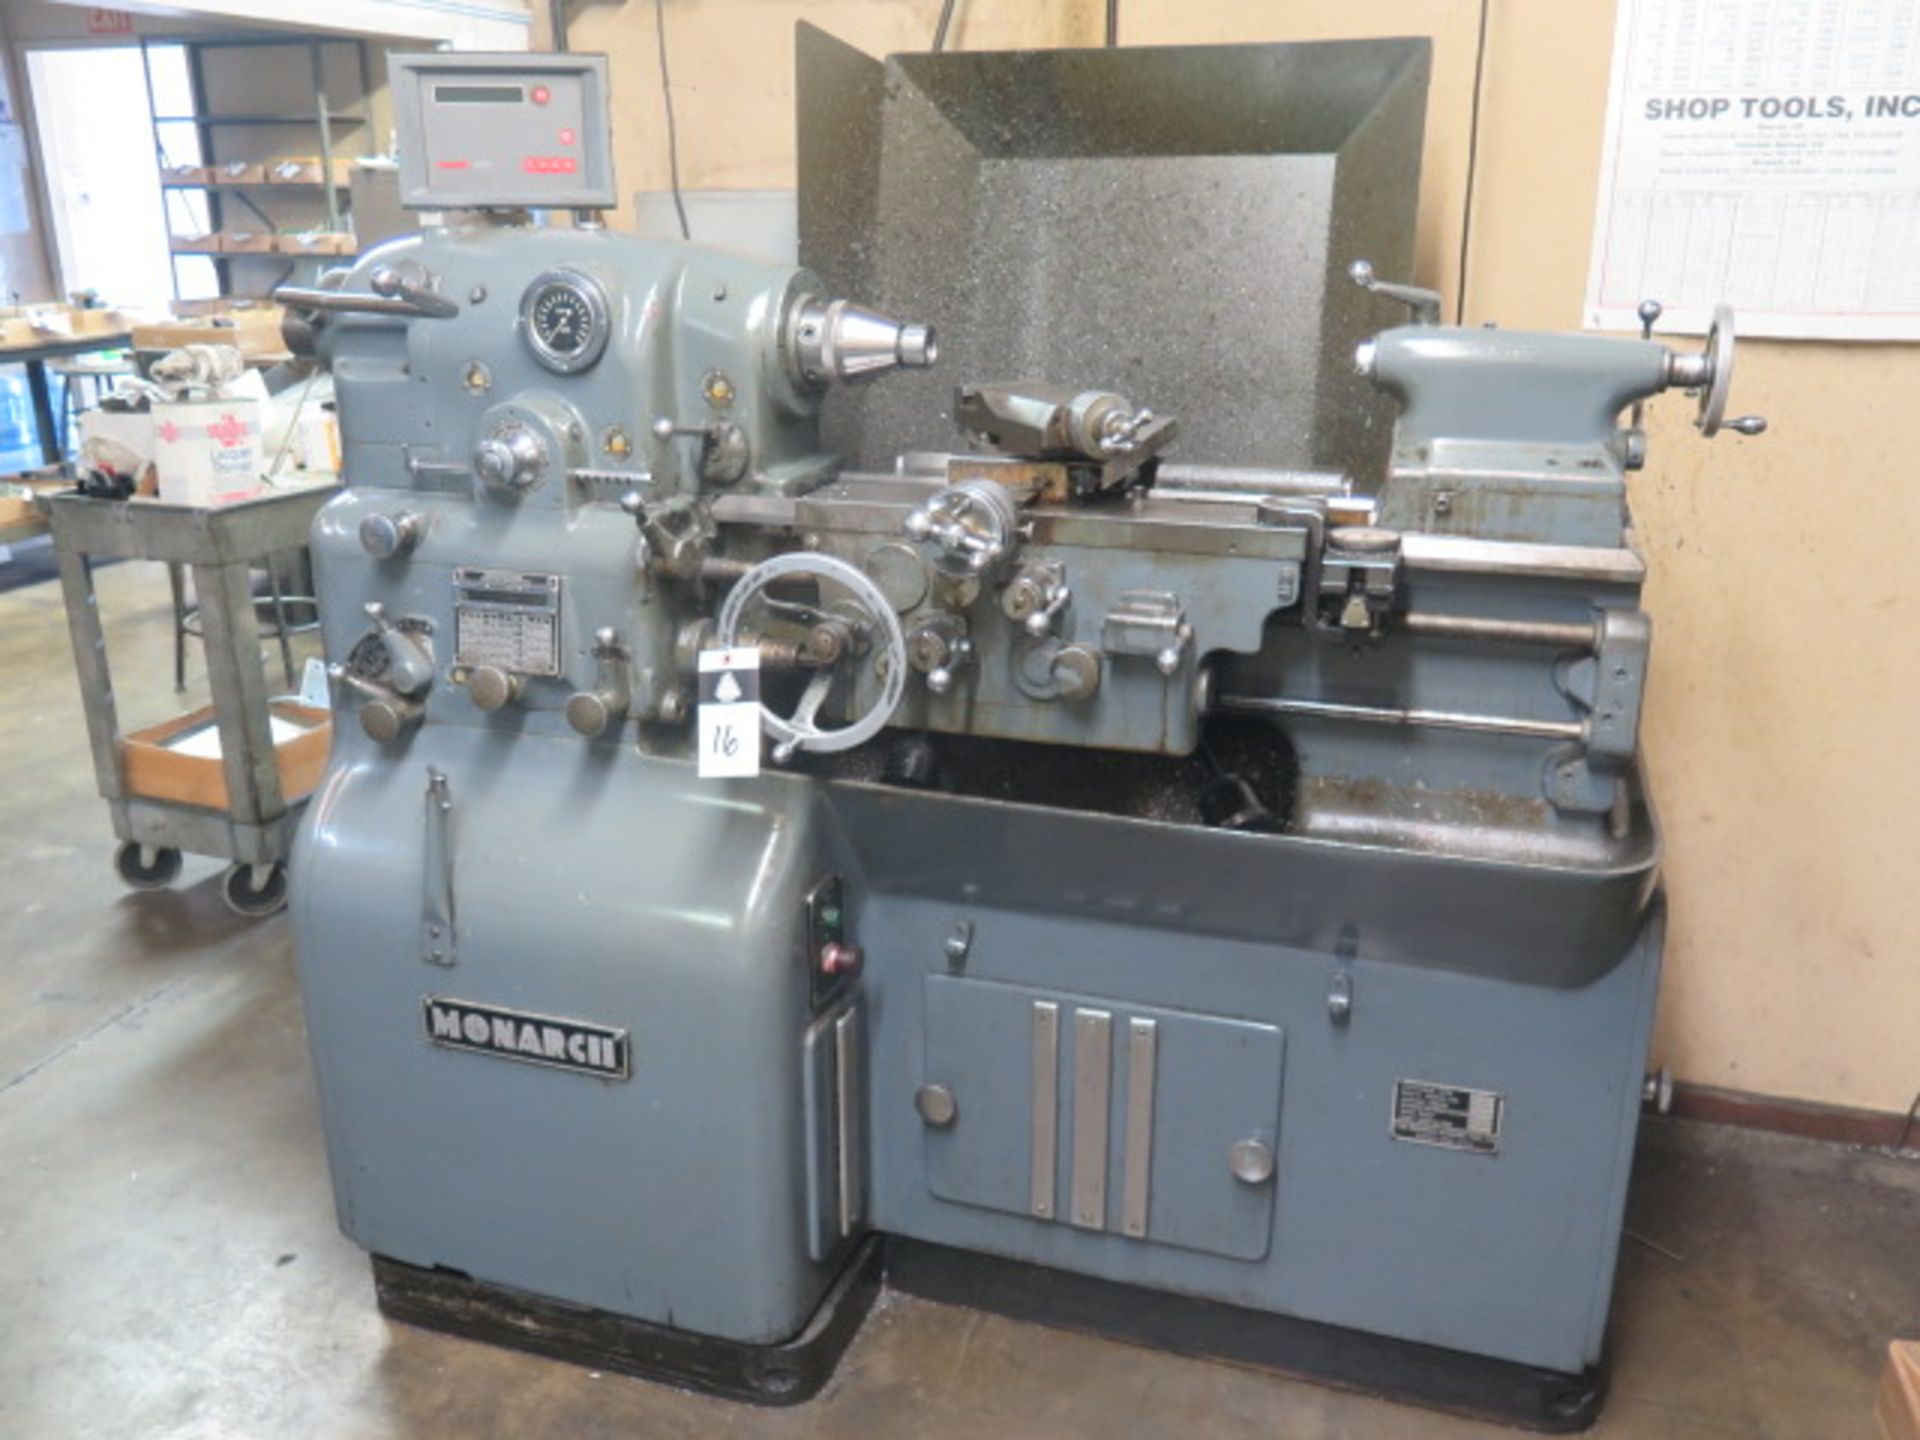 Monarch 10”EE 12 ½” x 20” Lathe s/n 43039 w/ Newall DPG DRO, 3000 RPM, Inch Threading, SOLD AS IS